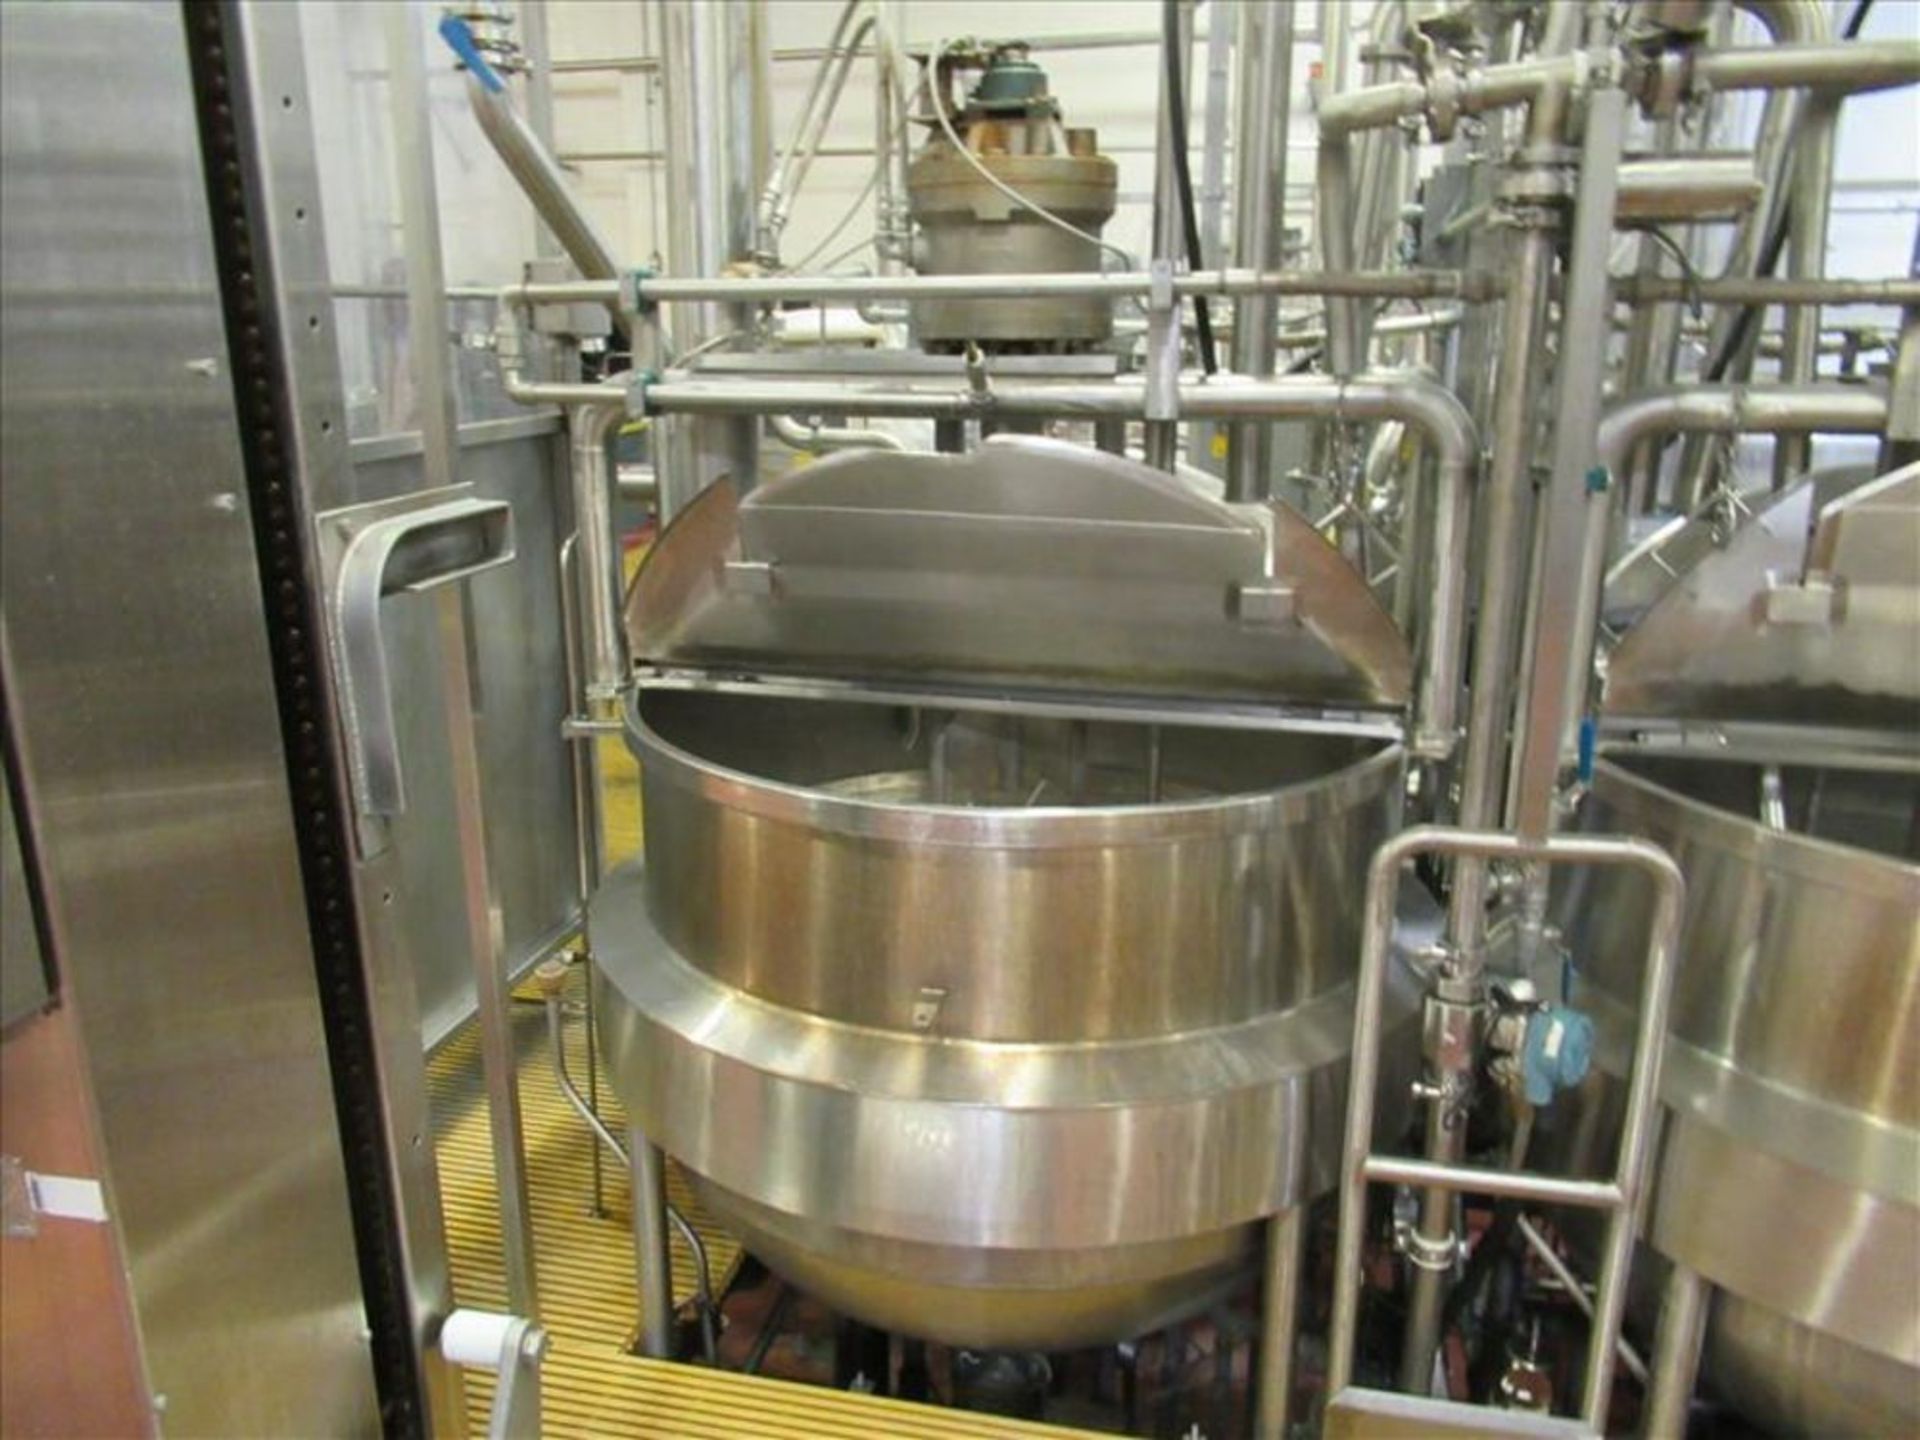 J. C. Pardo jacketed kettle ser. no. 7120-3 approx 300 gallons capacity, stainless jacketed, 50